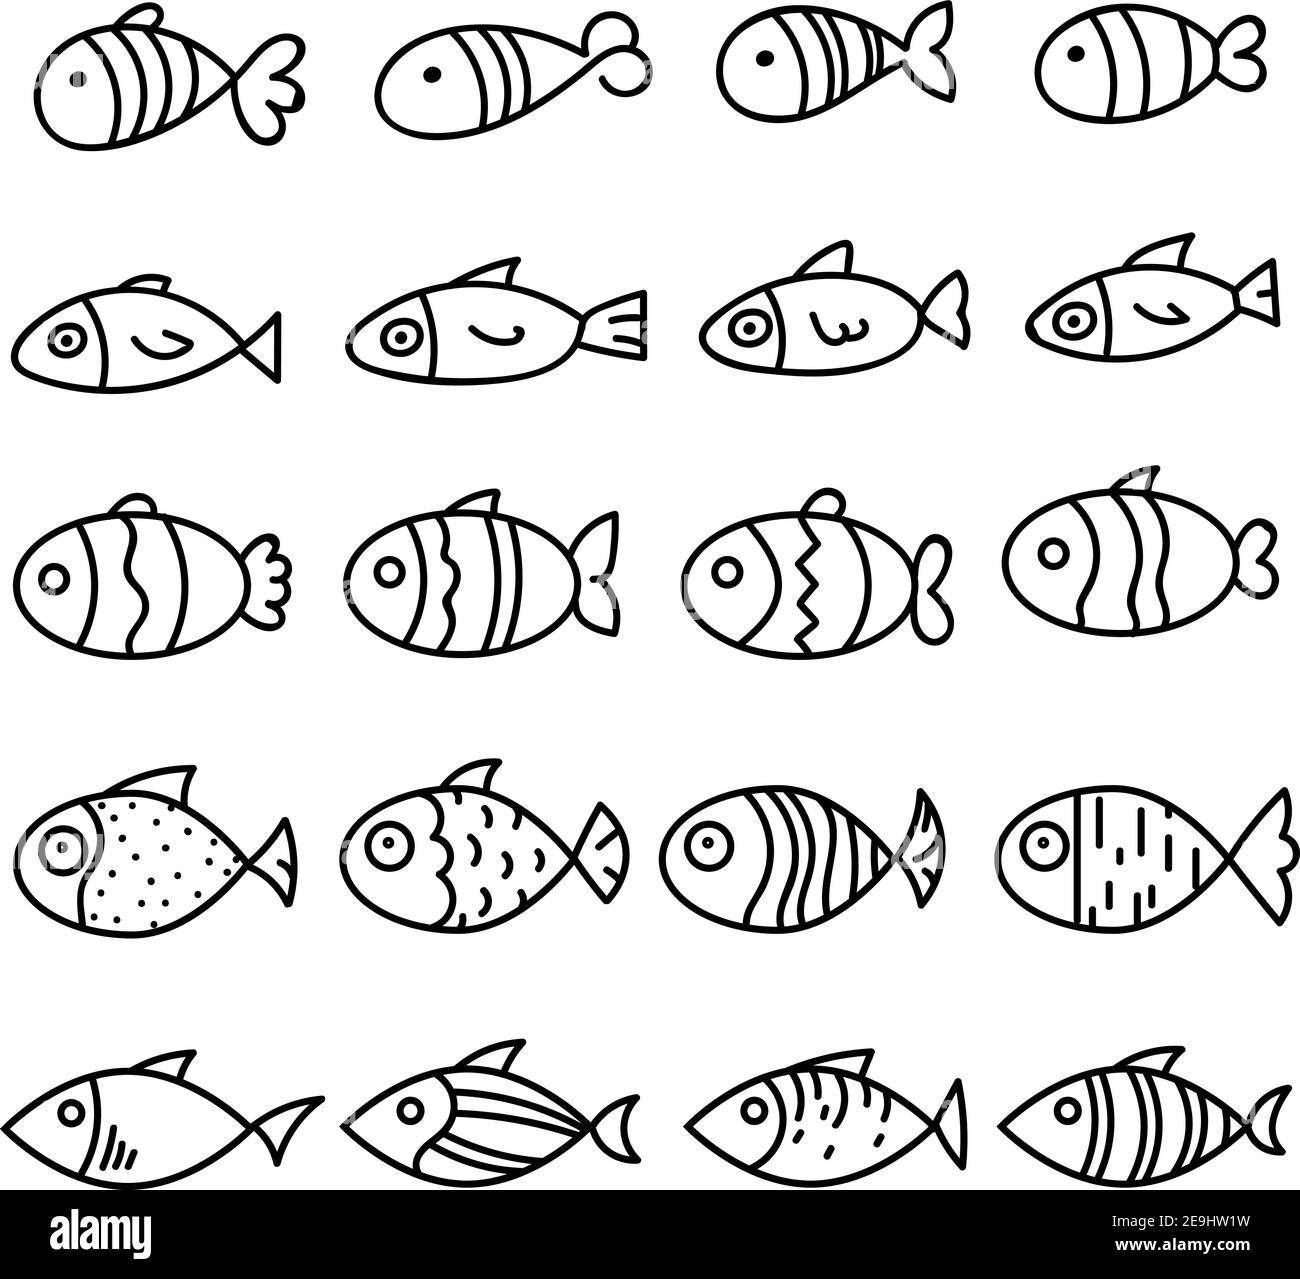 Different types of fish, illustration, vector on white background Stock ...